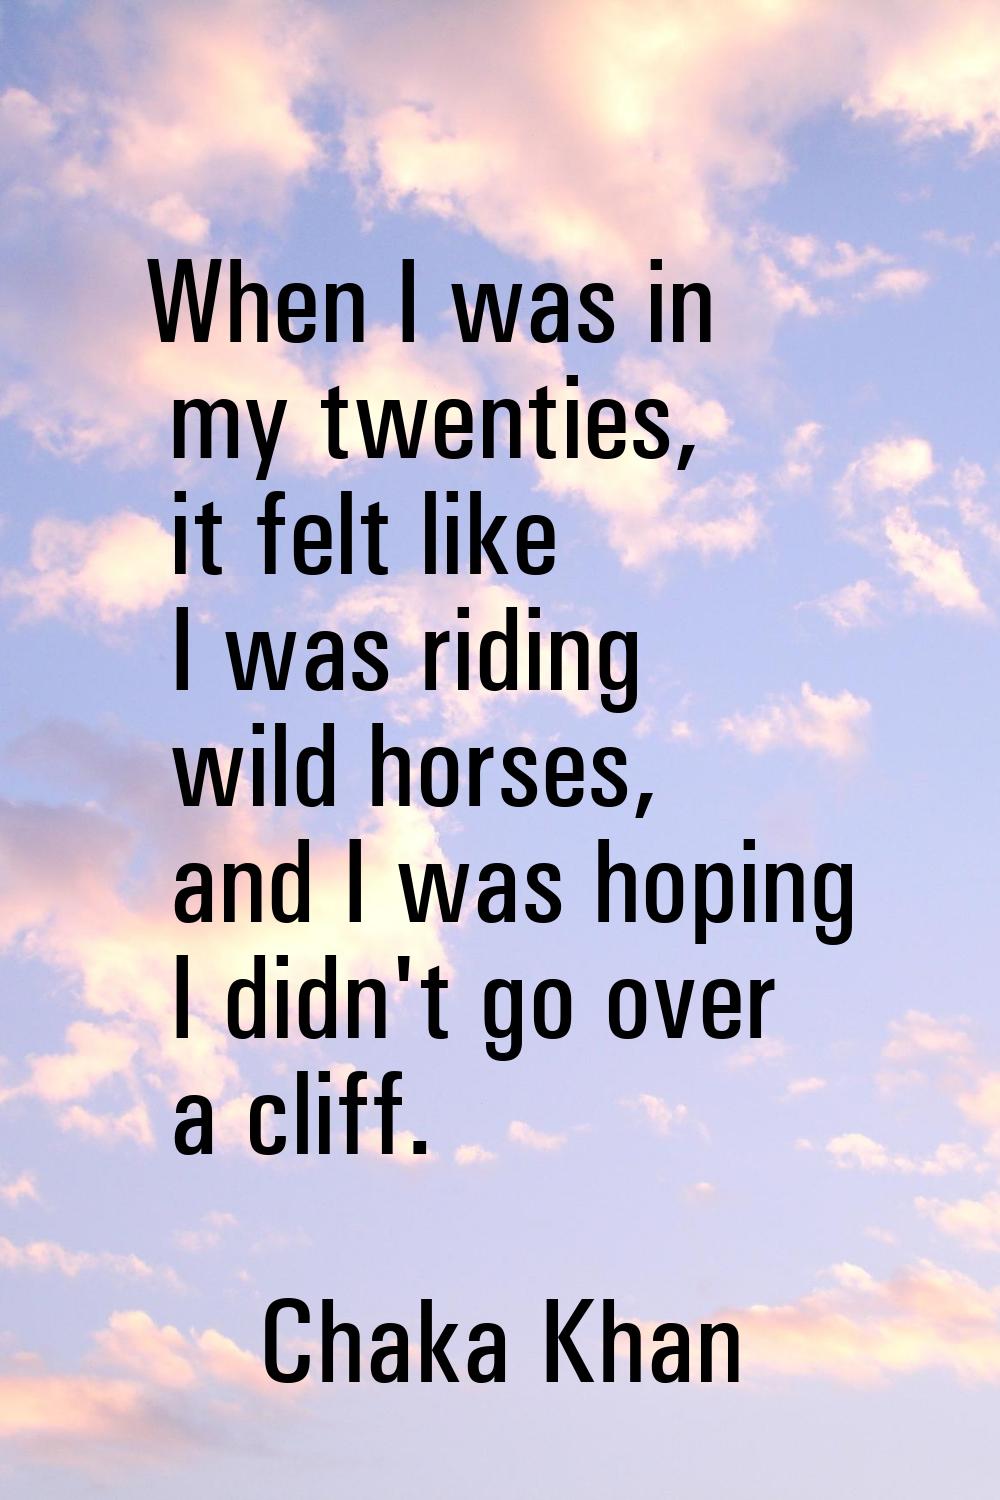 When I was in my twenties, it felt like I was riding wild horses, and I was hoping I didn't go over